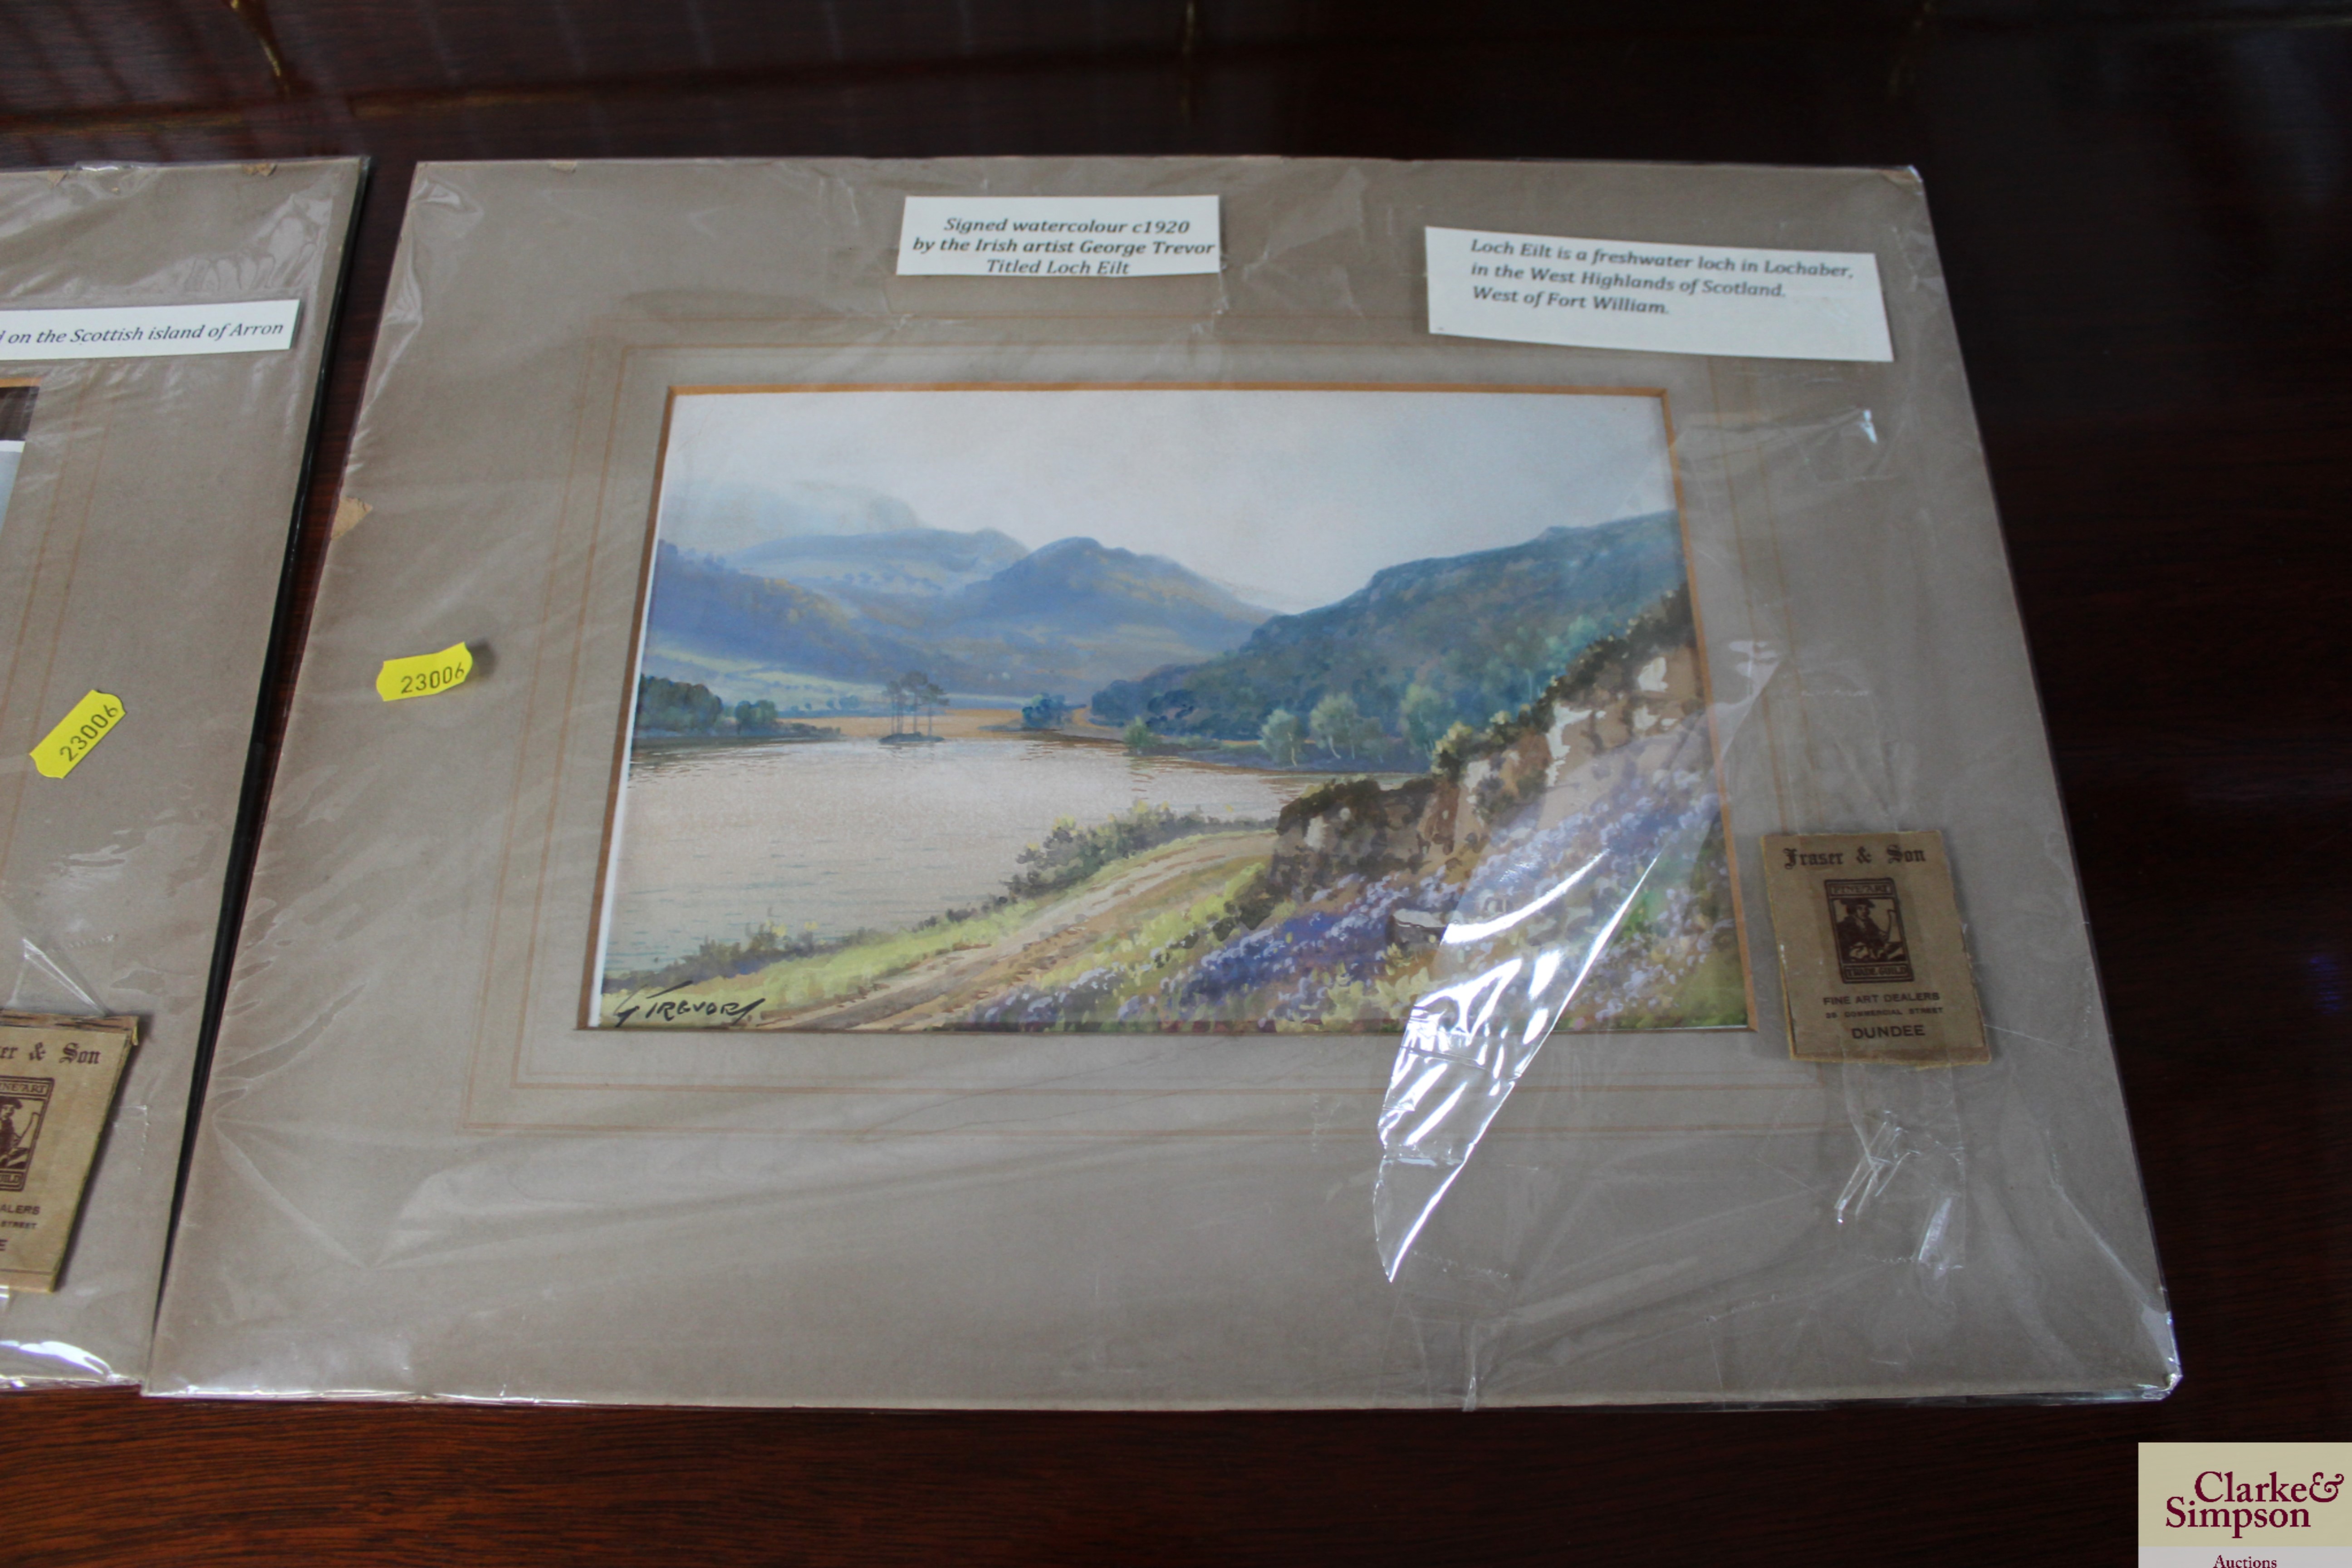 Two signed watercolours by George Trevor "Loch Eil - Image 3 of 3